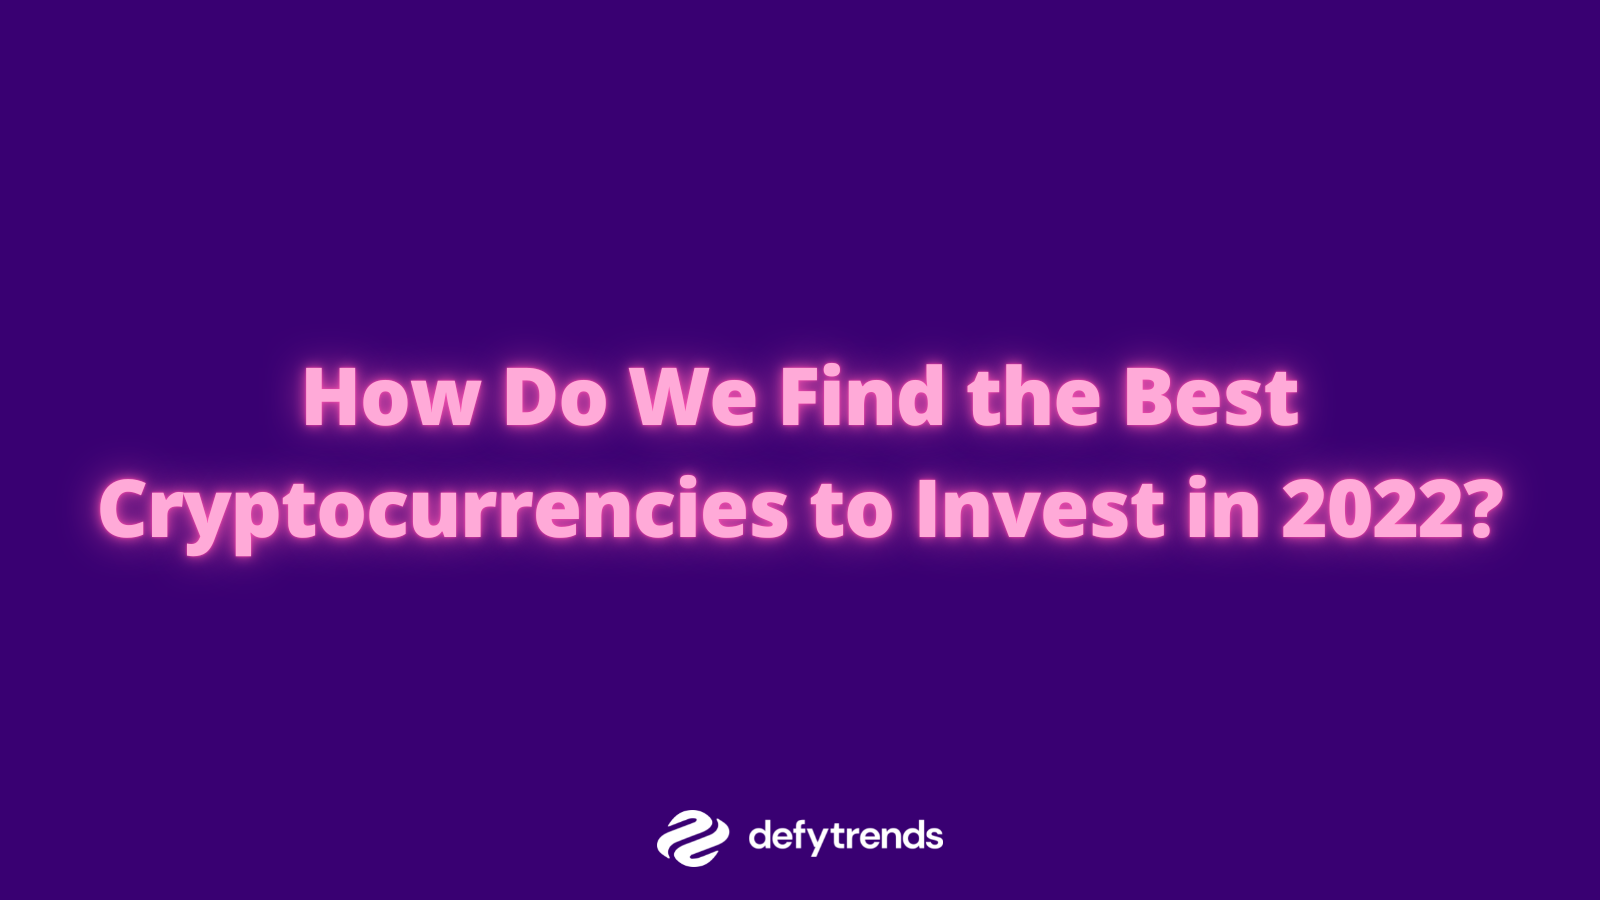 How Do We Find the Best Cryptocurrencies to Invest in 2022?